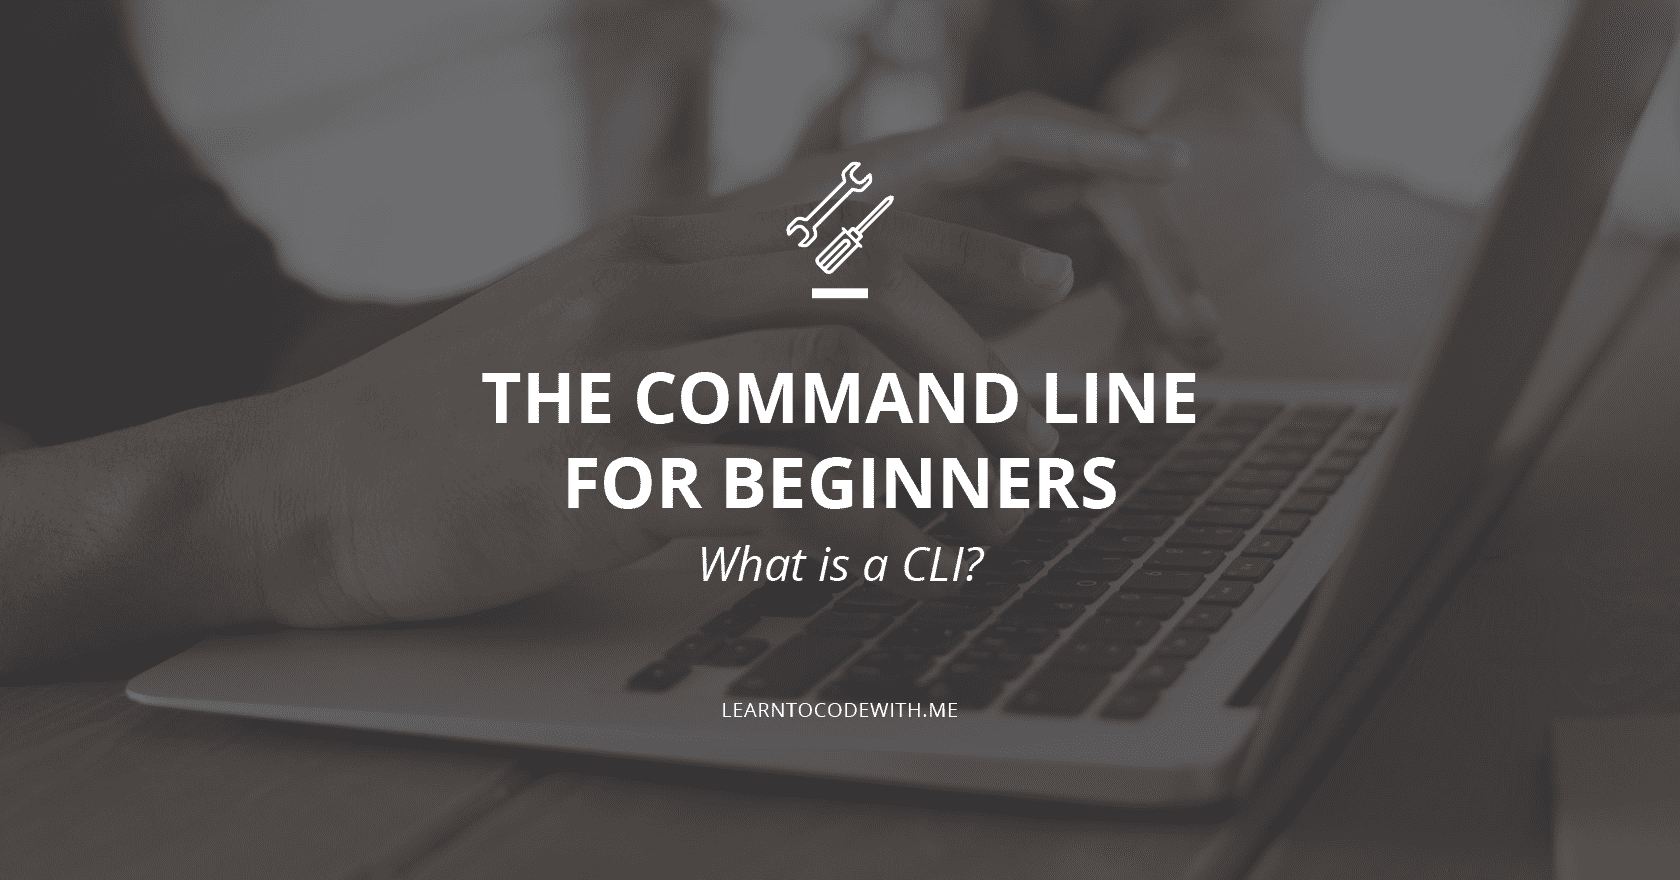 The Command Line for Beginners